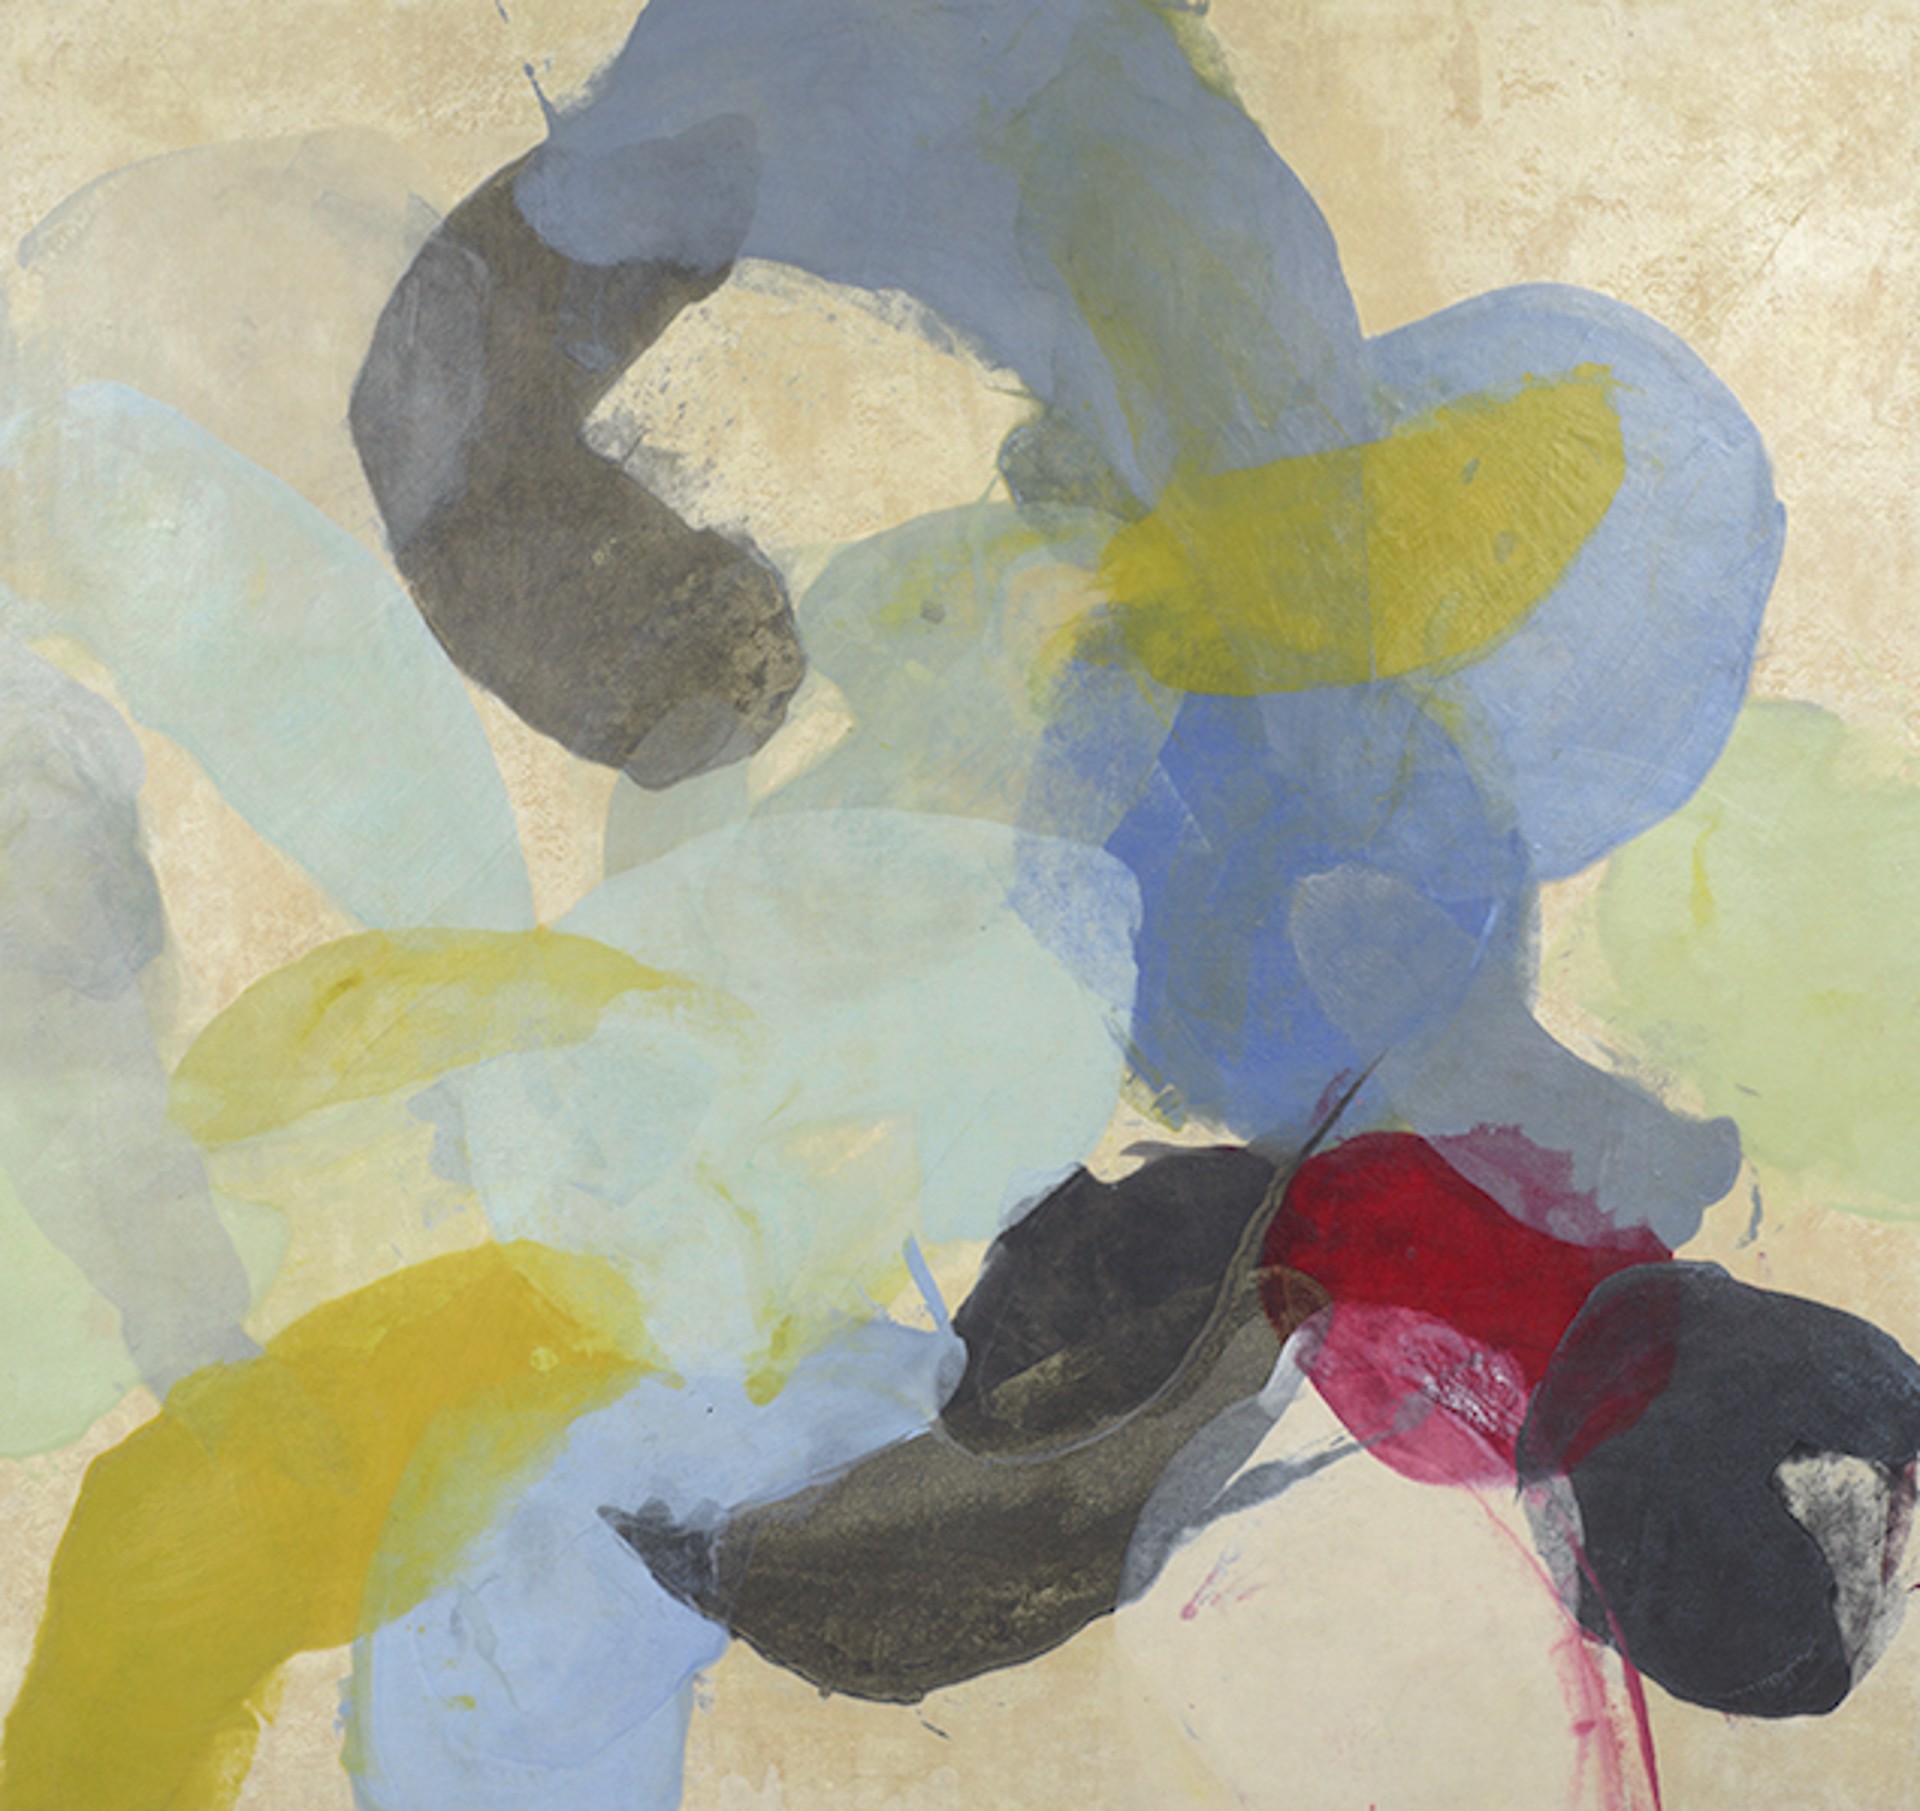 Do You Guess I have Some Intricate Purpose? by Tracey Adams